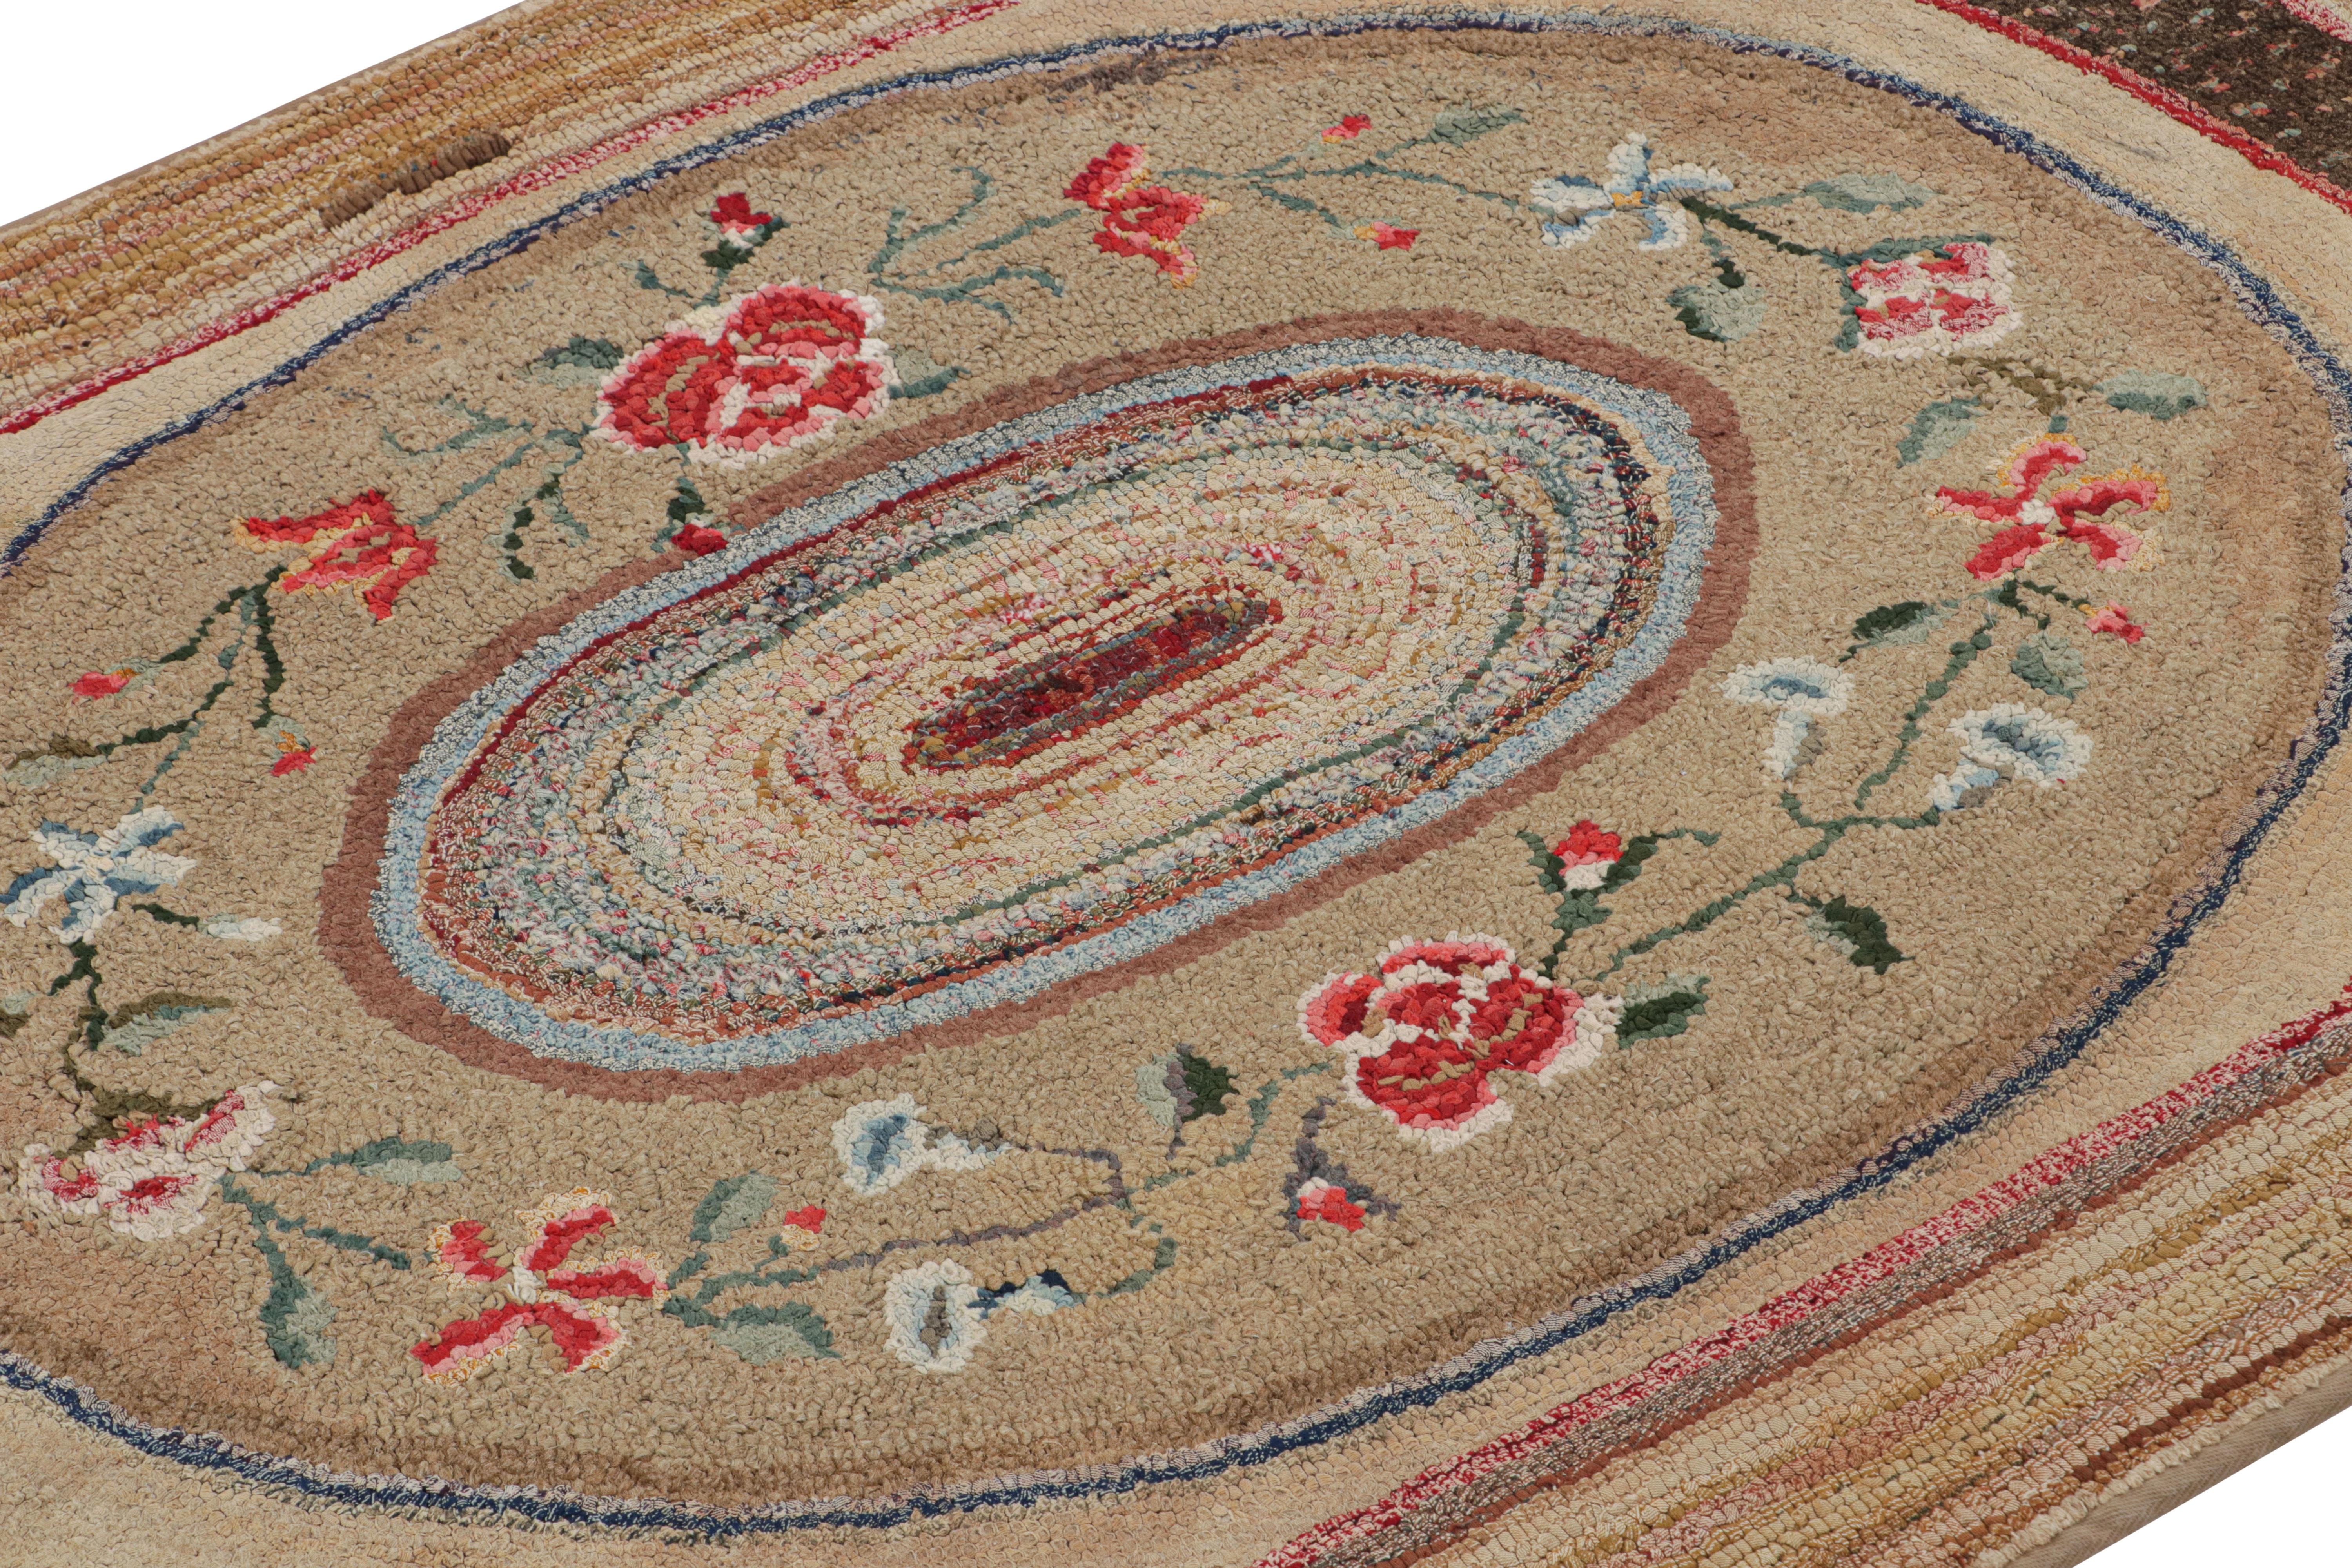 Hand-Knotted Antique Hooked Rug in Brown, with Floral Patterns, from Rug & Kilim